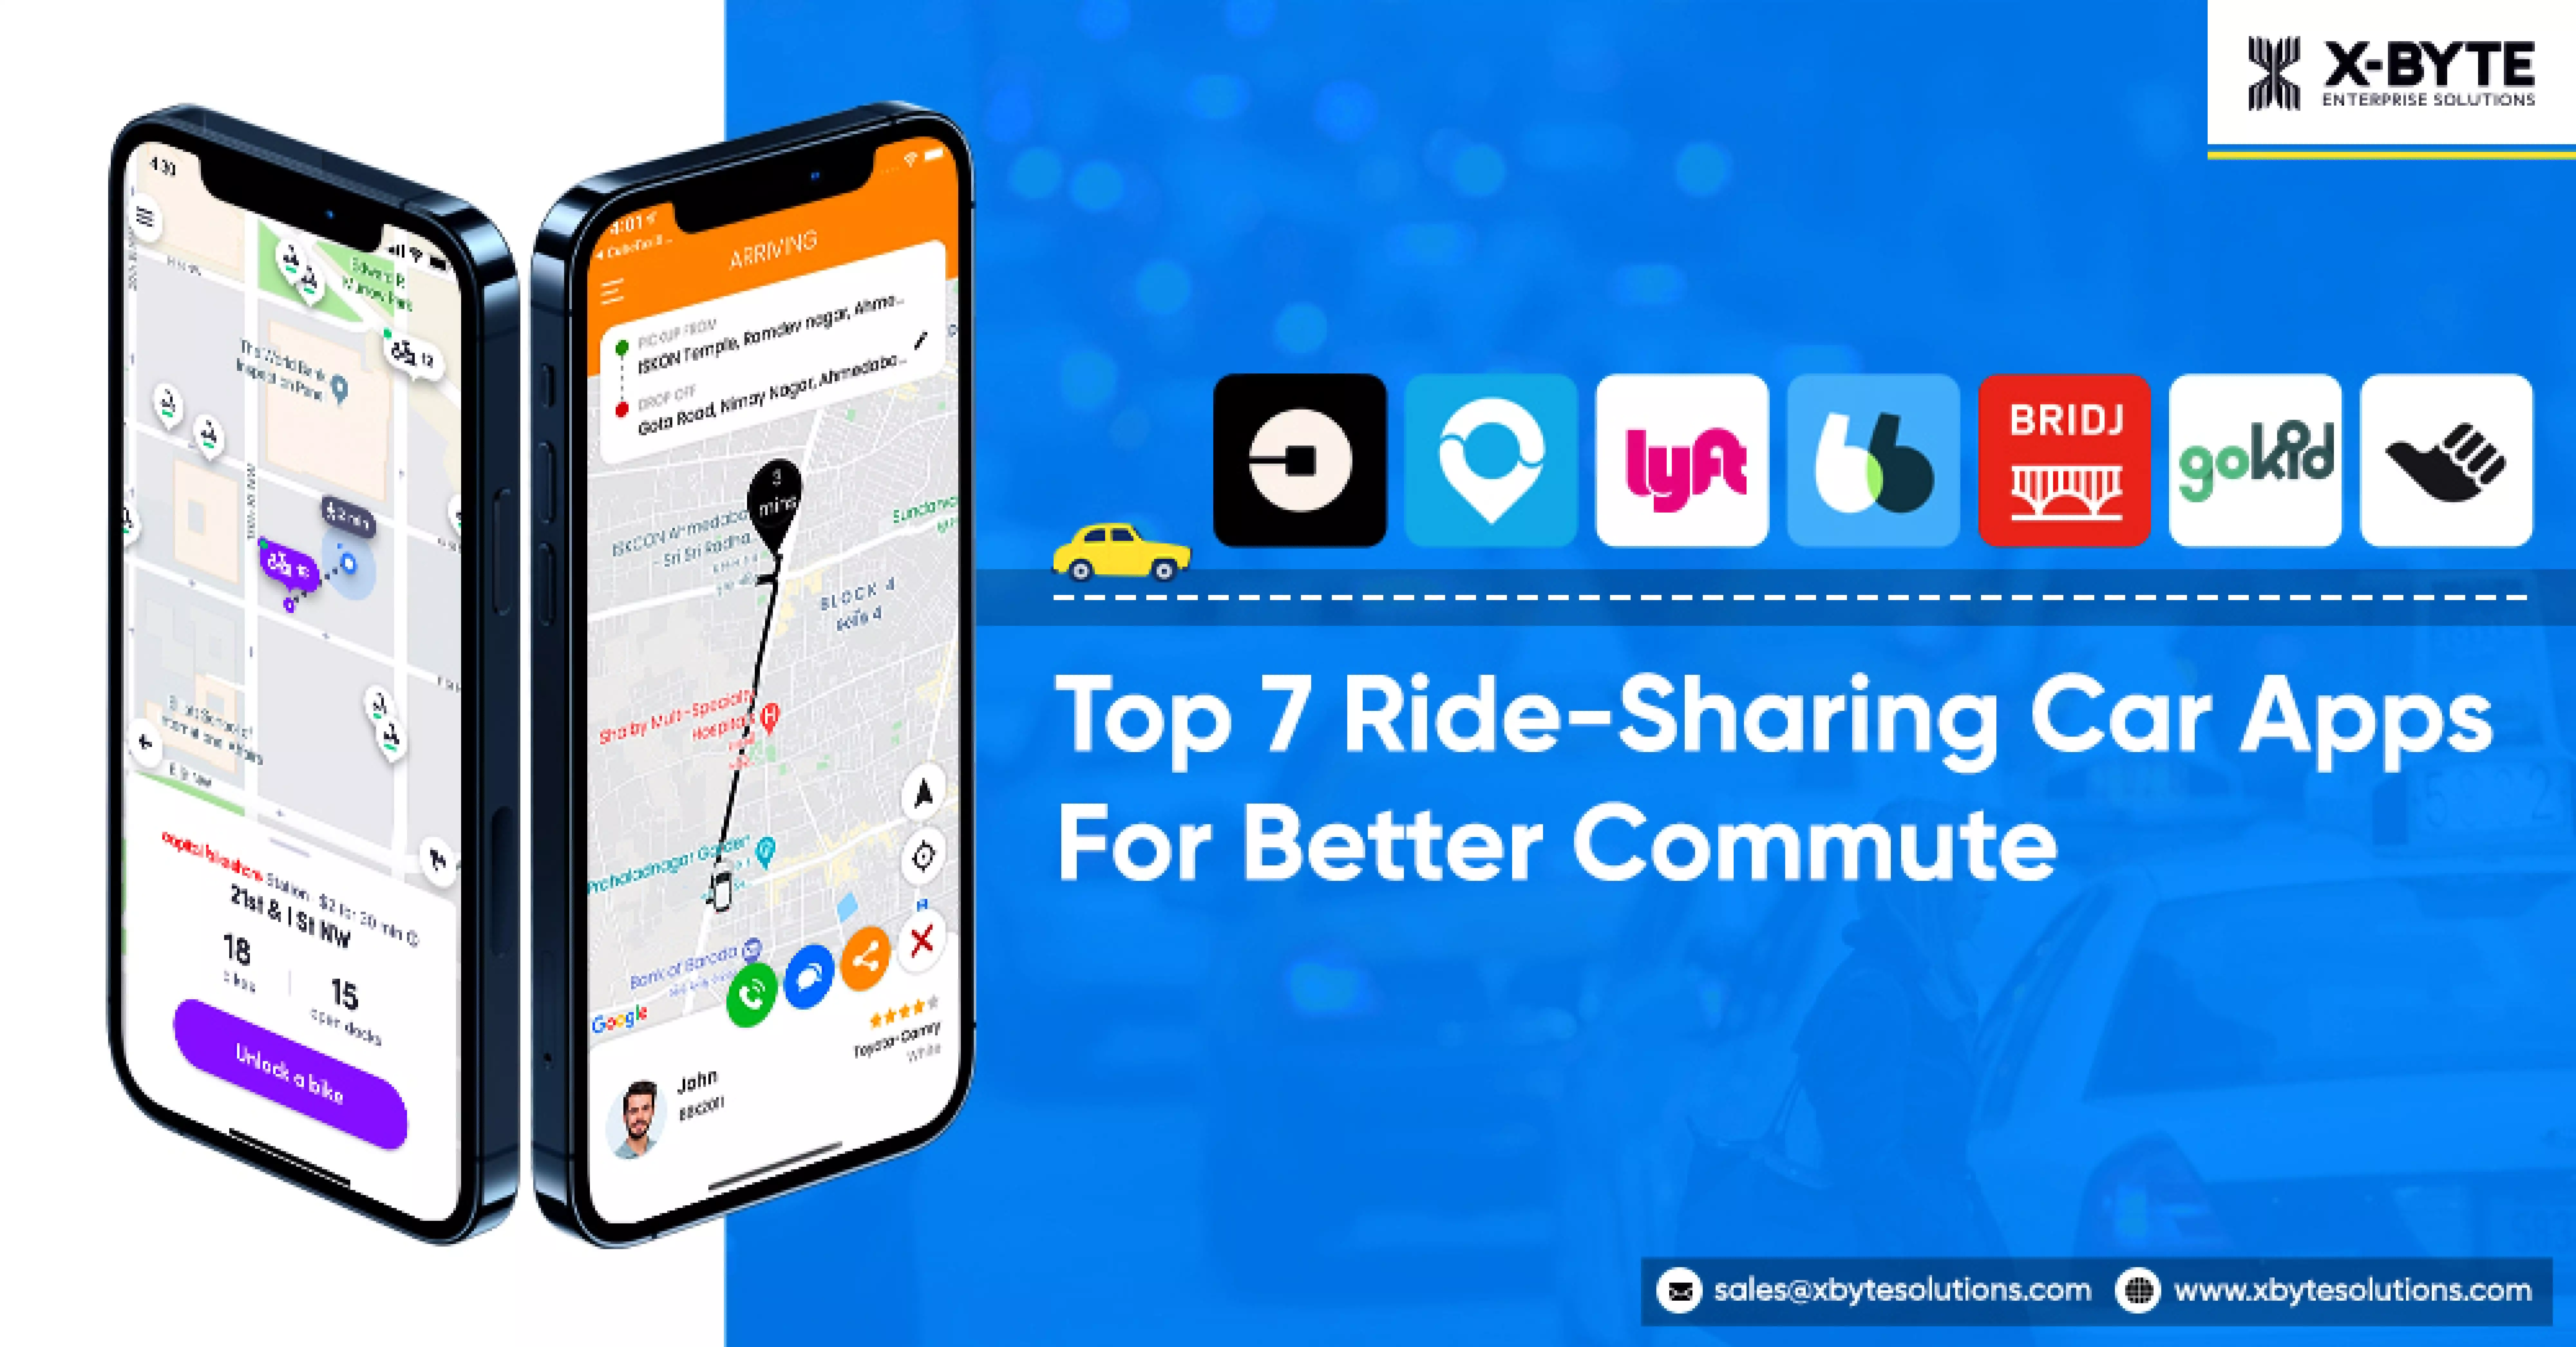 Top 7 Ride-Sharing Car Apps For Better Commute